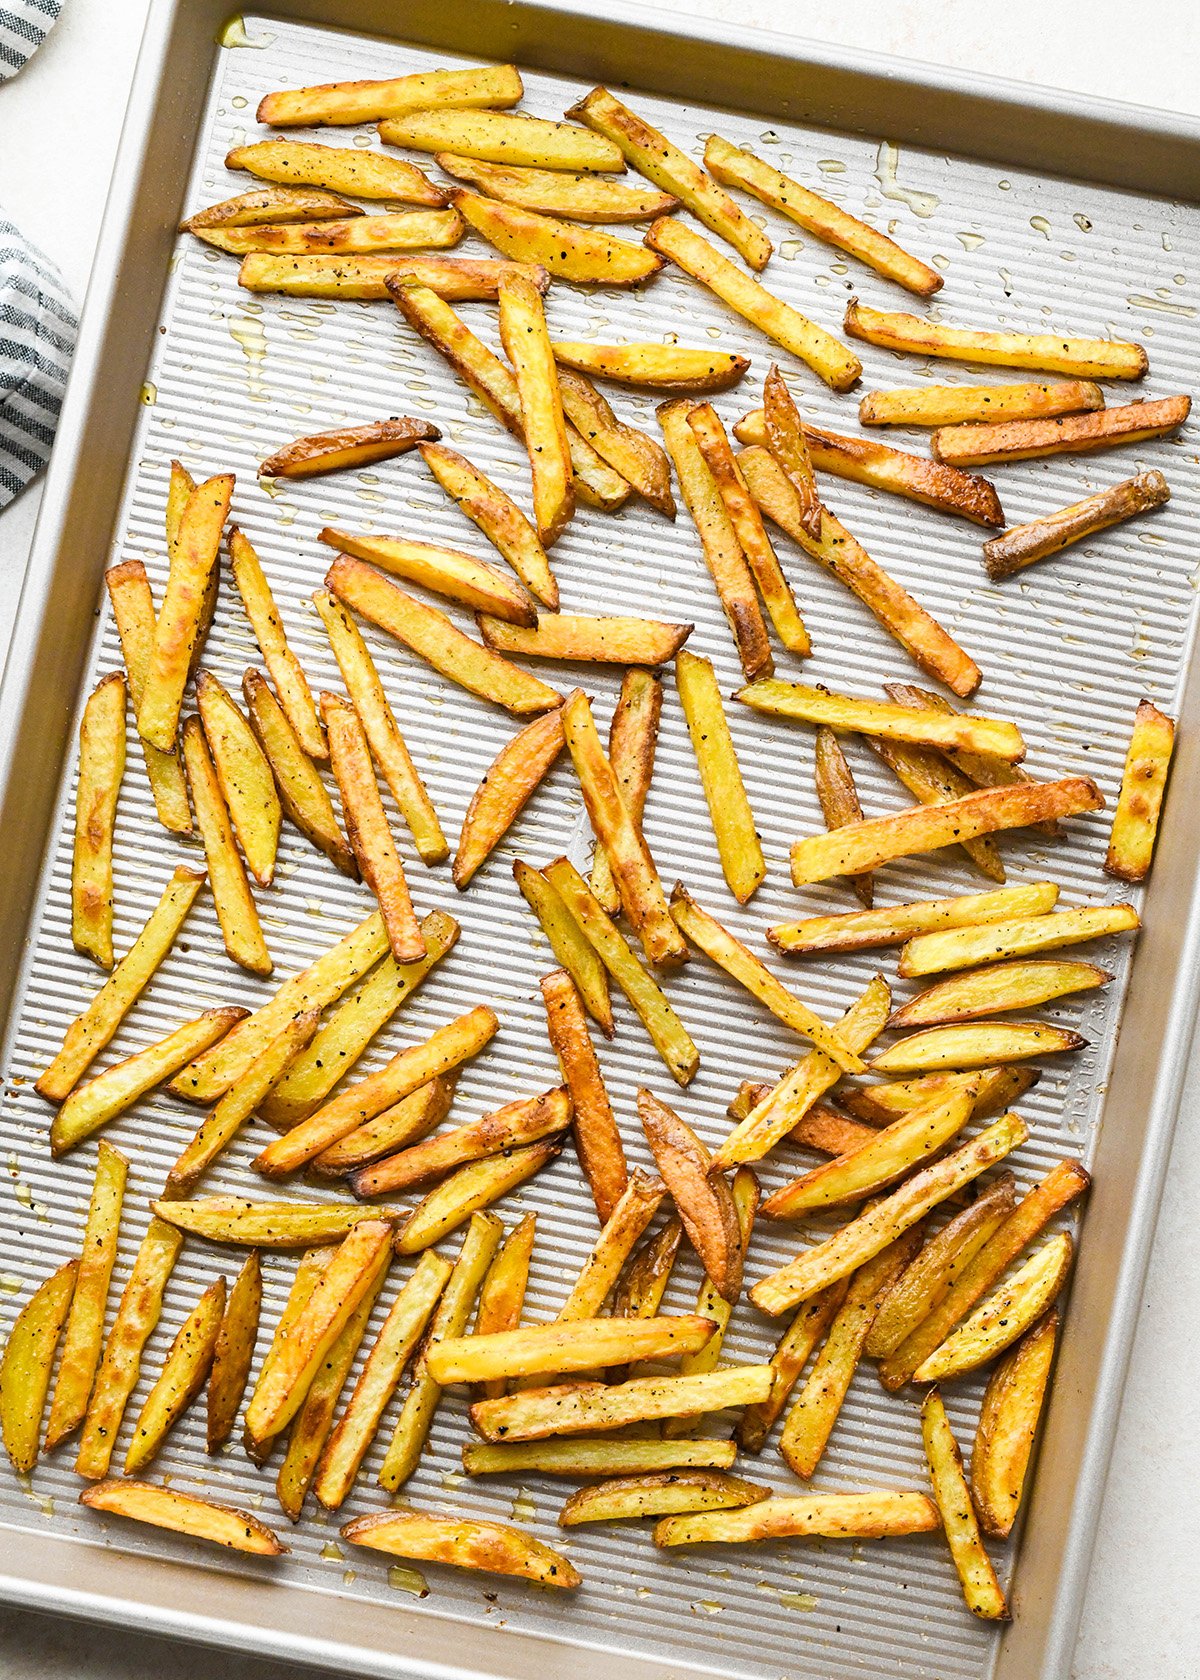 oven baked french fries on a baking sheet after baking